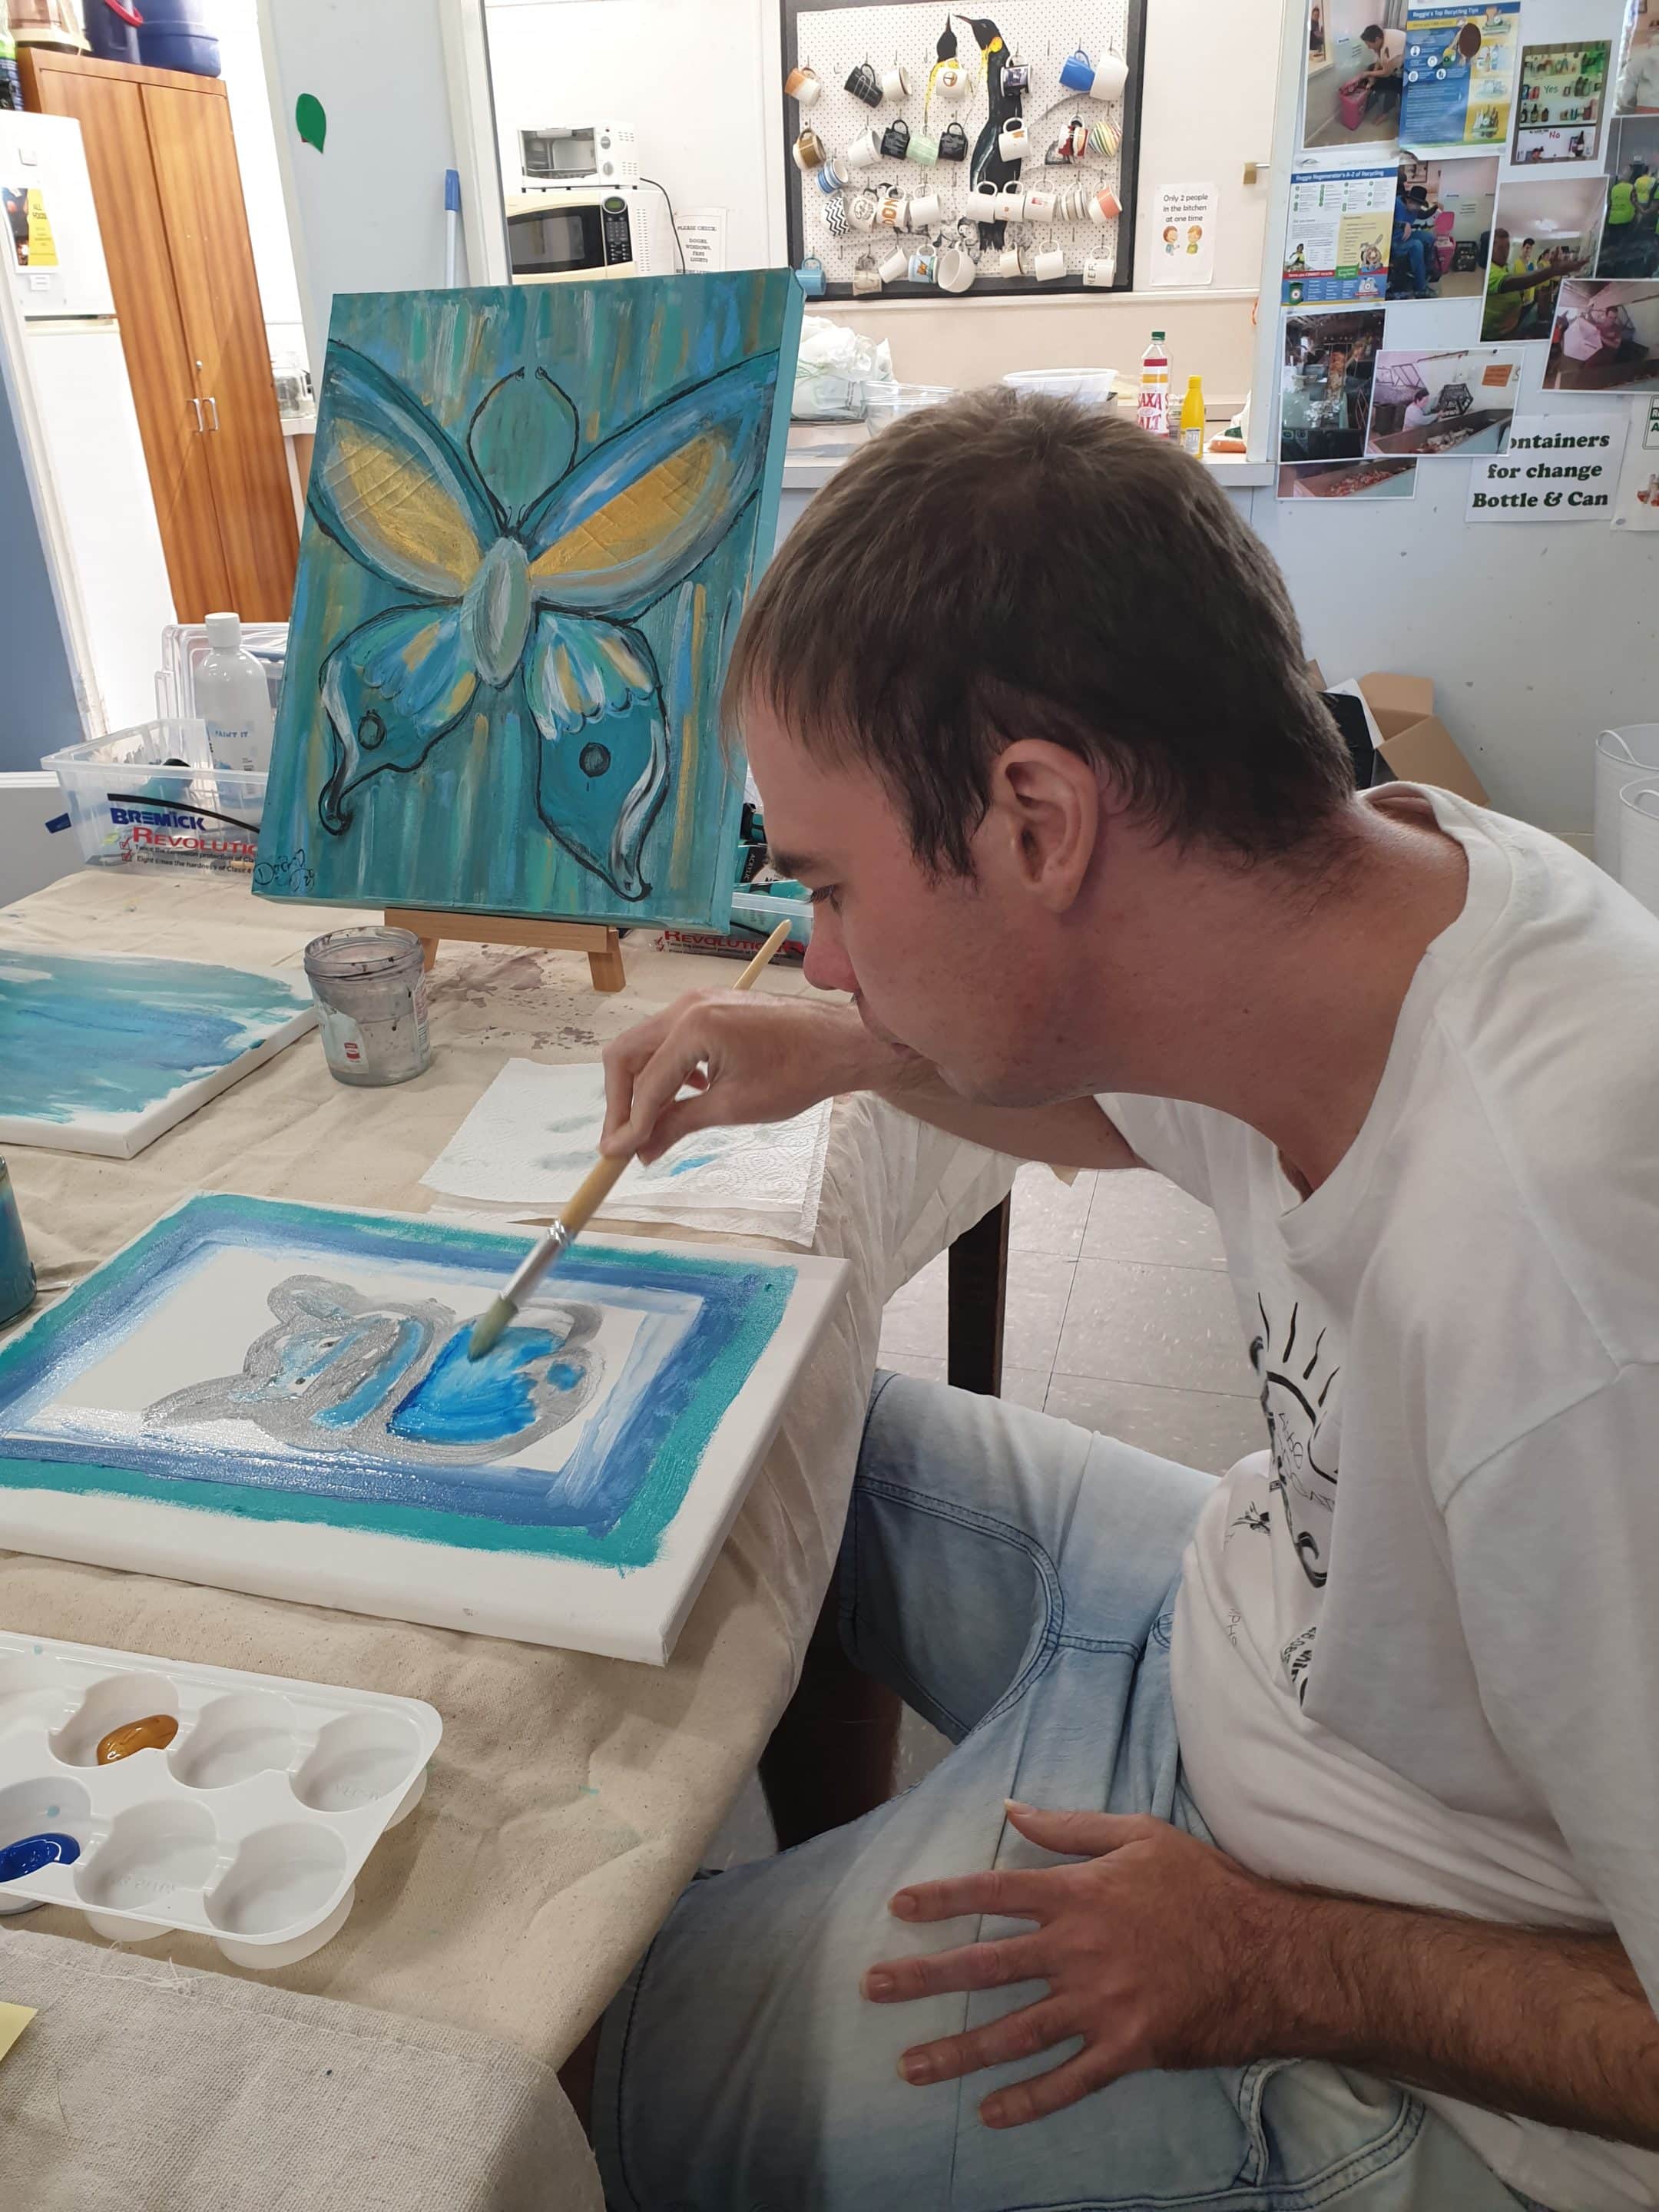 Chris Painting — Supported Independent Living in Bundaberg, QLD